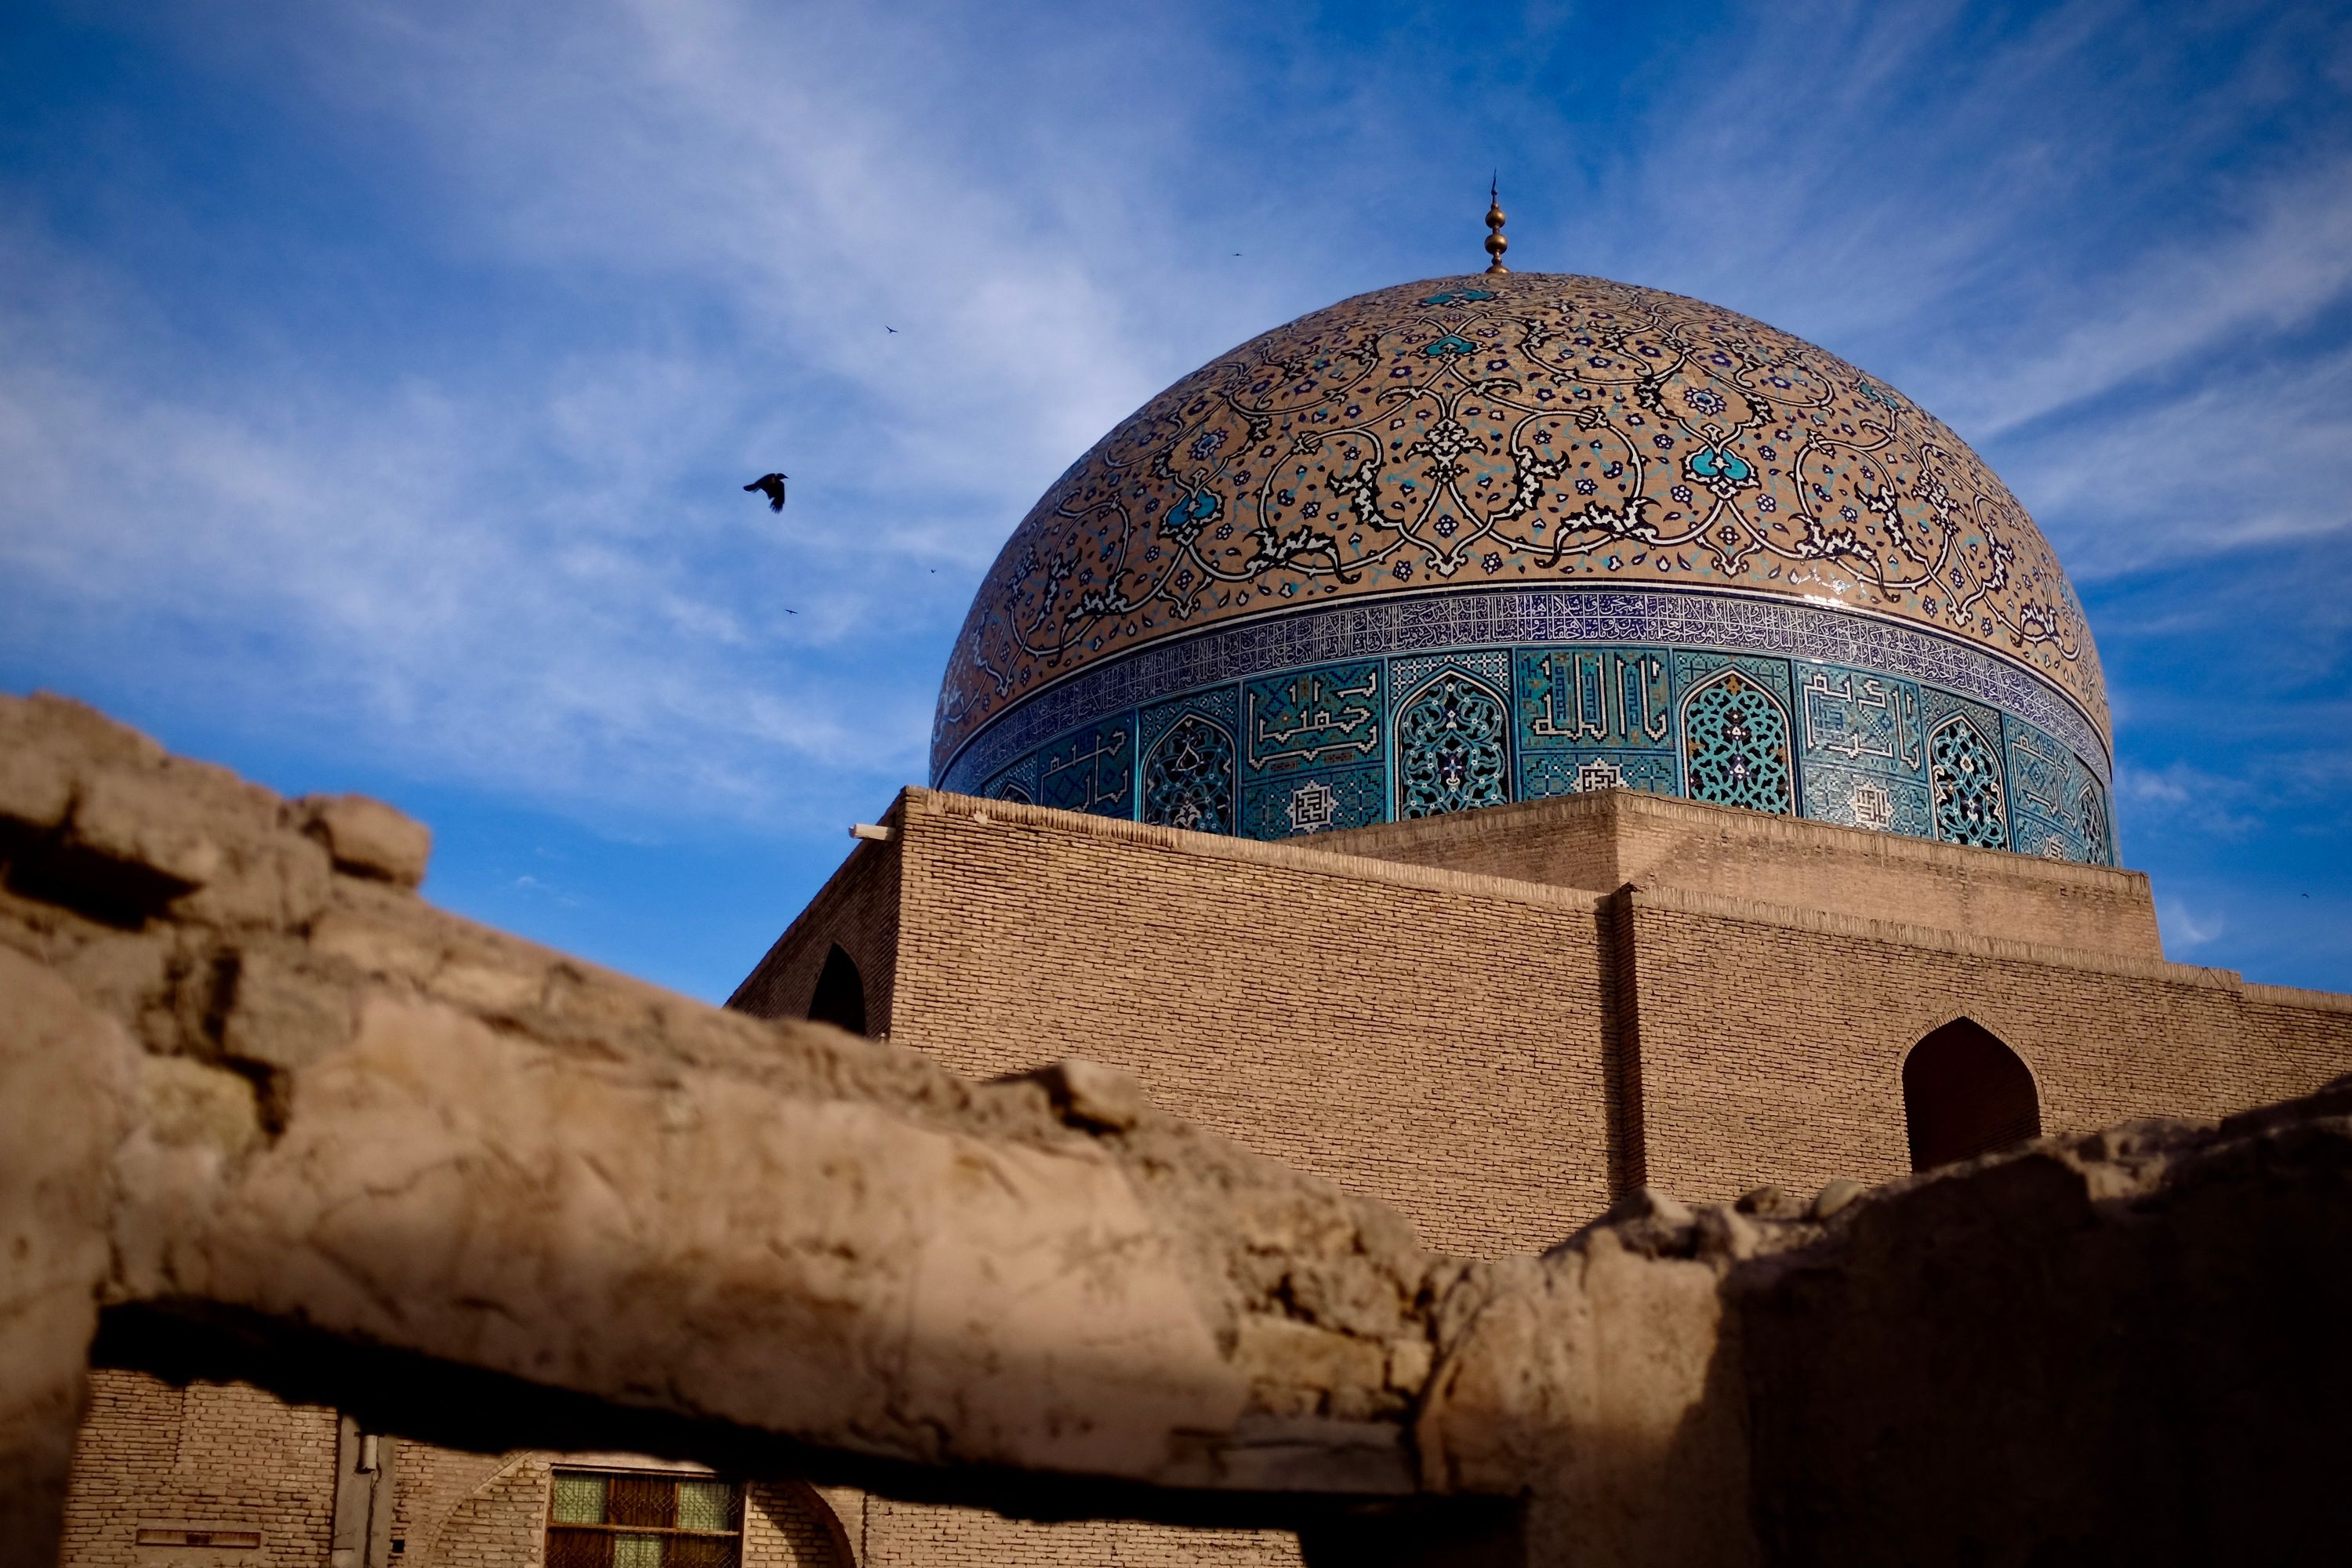 A crow flies past the brown and turquoise dome of one of the most beautiful buildings in the world.